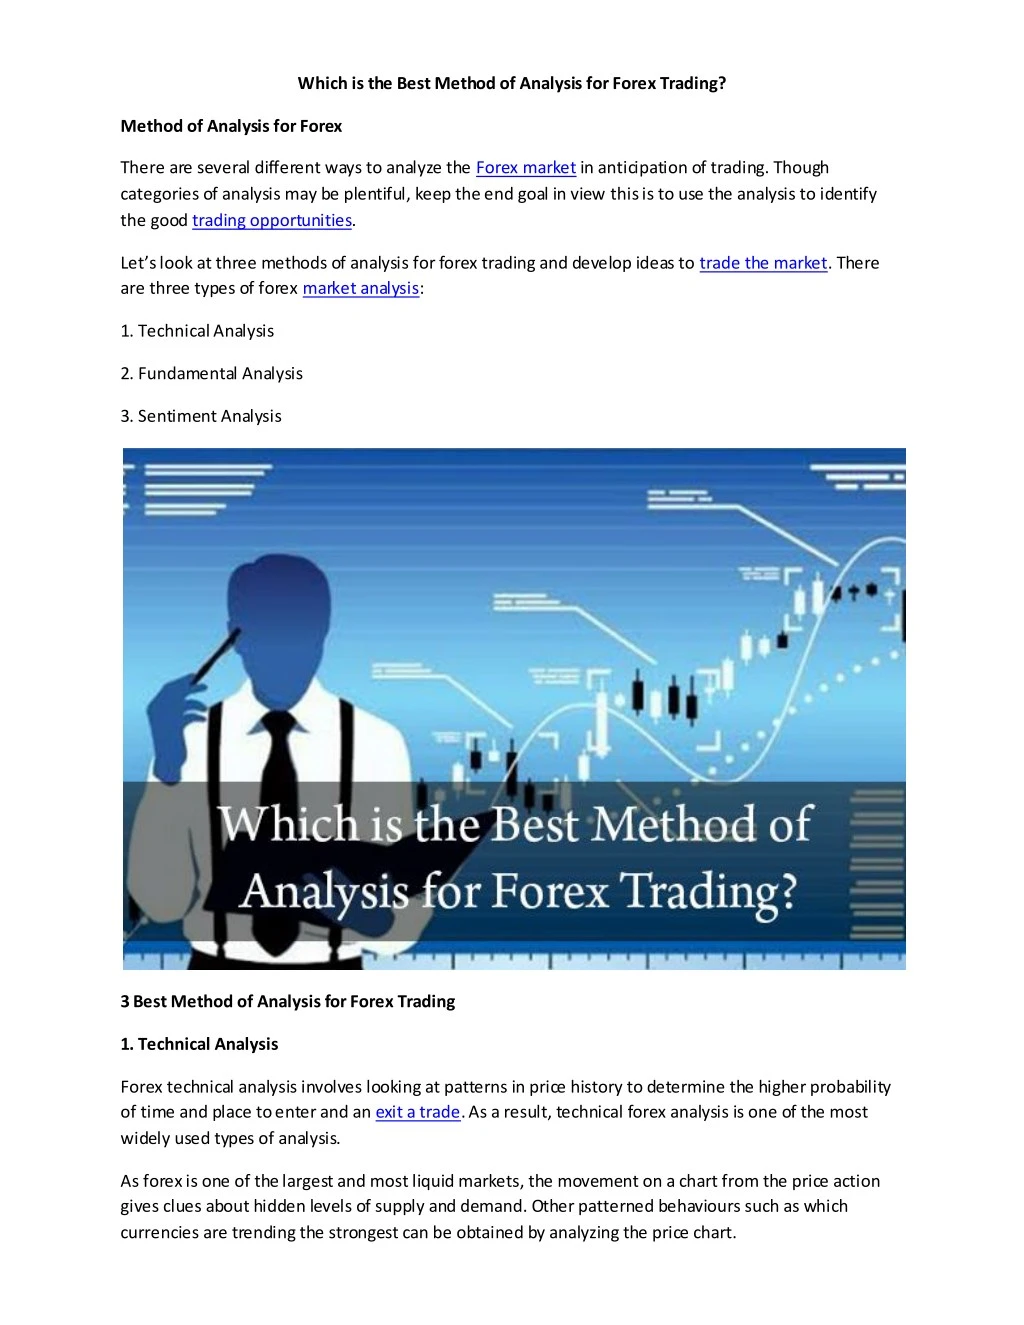 which is the best method of analysis for forex